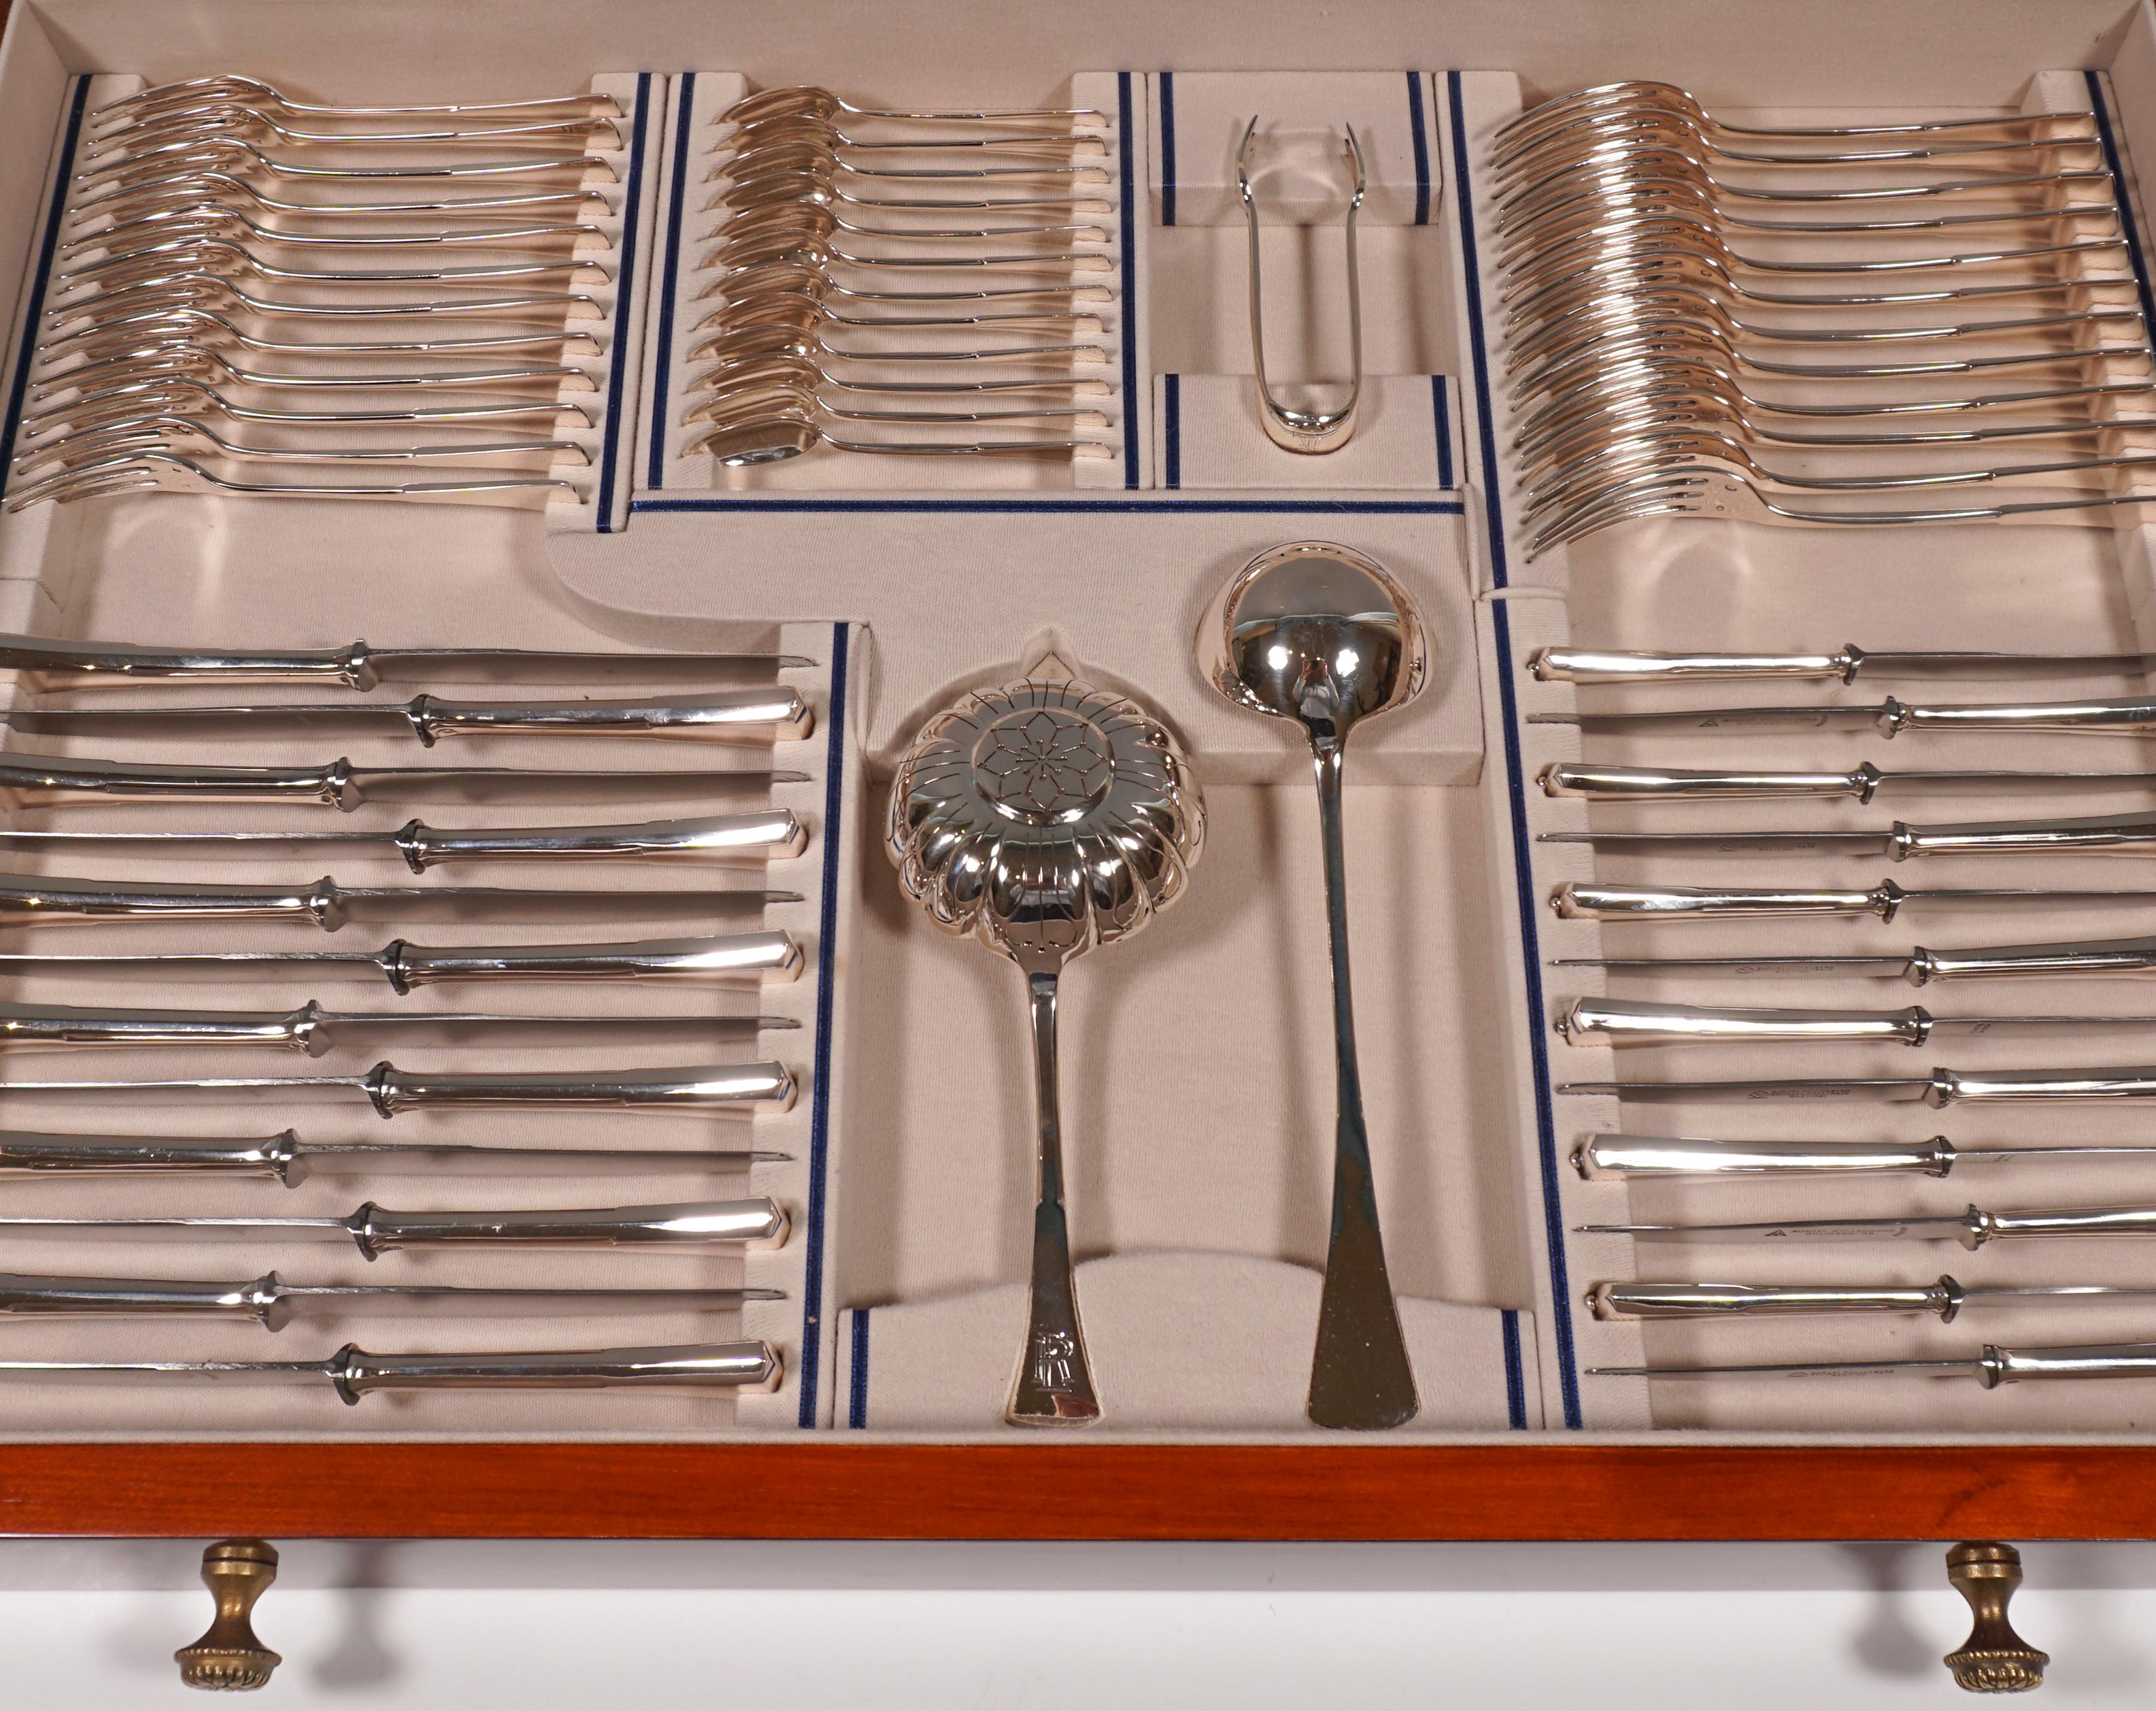 Hungarian Art Nouveau Silver Cutlery Set For 12 People In Showcase, Austria-Hungary, 1920